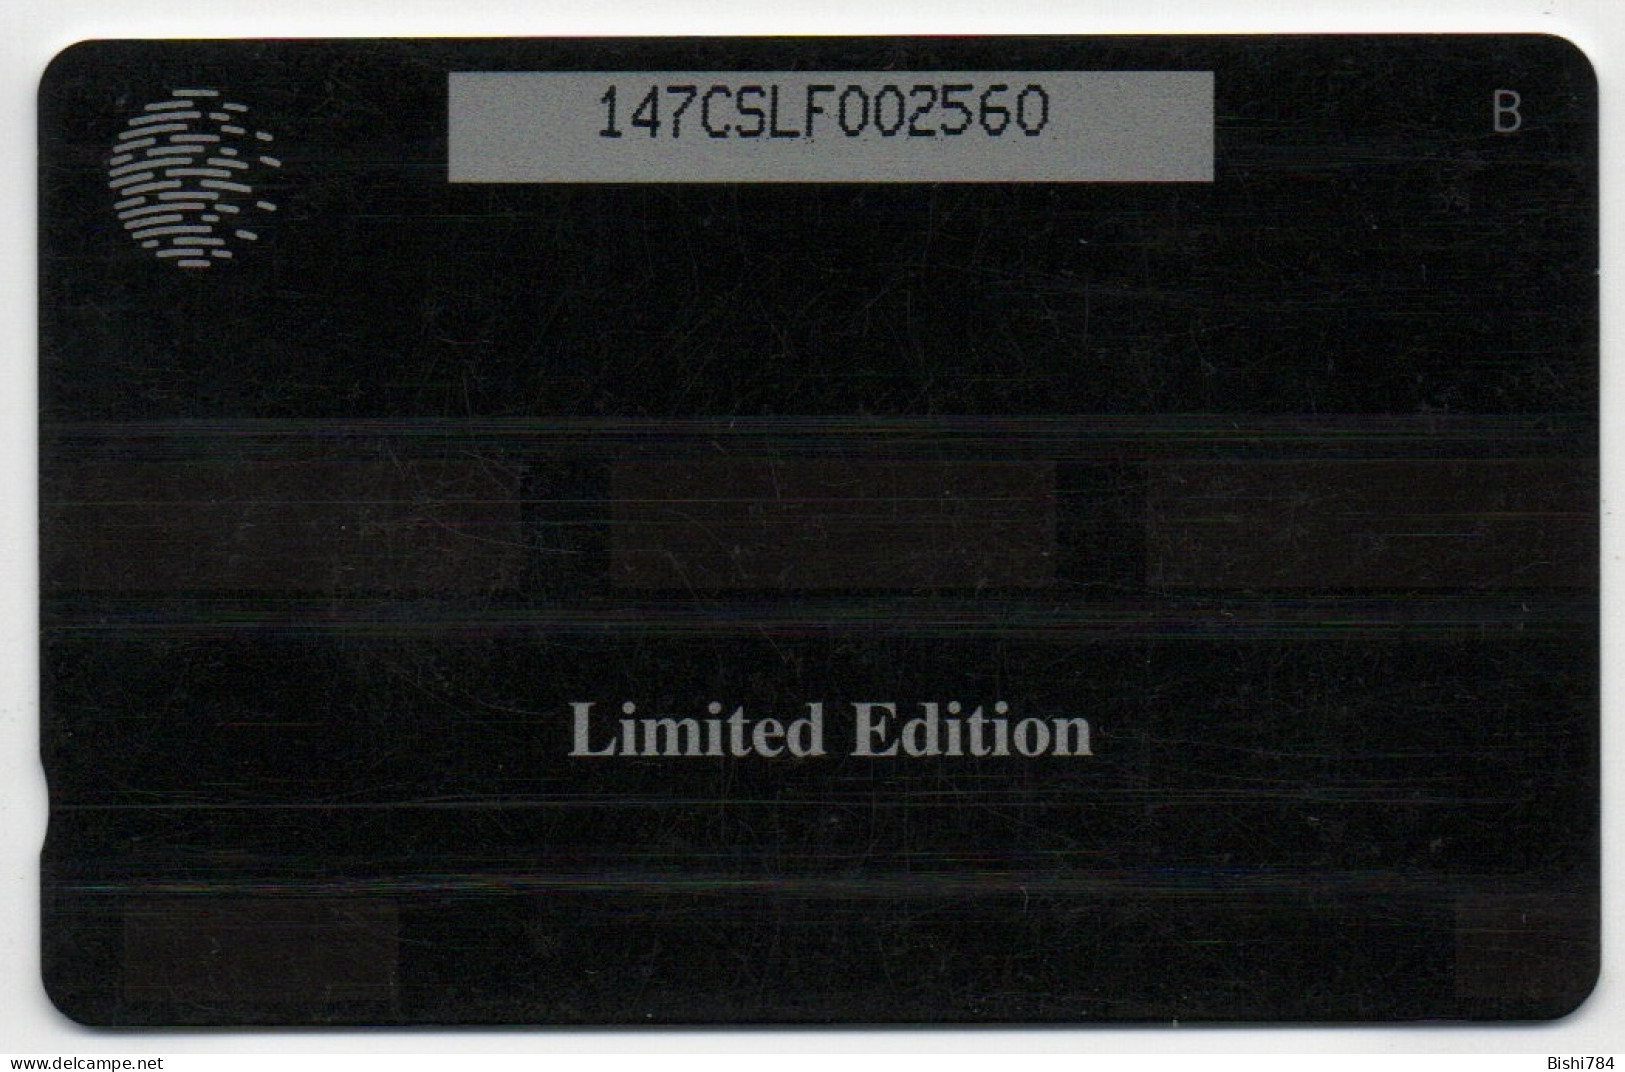 St. Lucia - Jazz Festival 1997 $40 - 147CSLF (very Small Bold Font) - St. Lucia